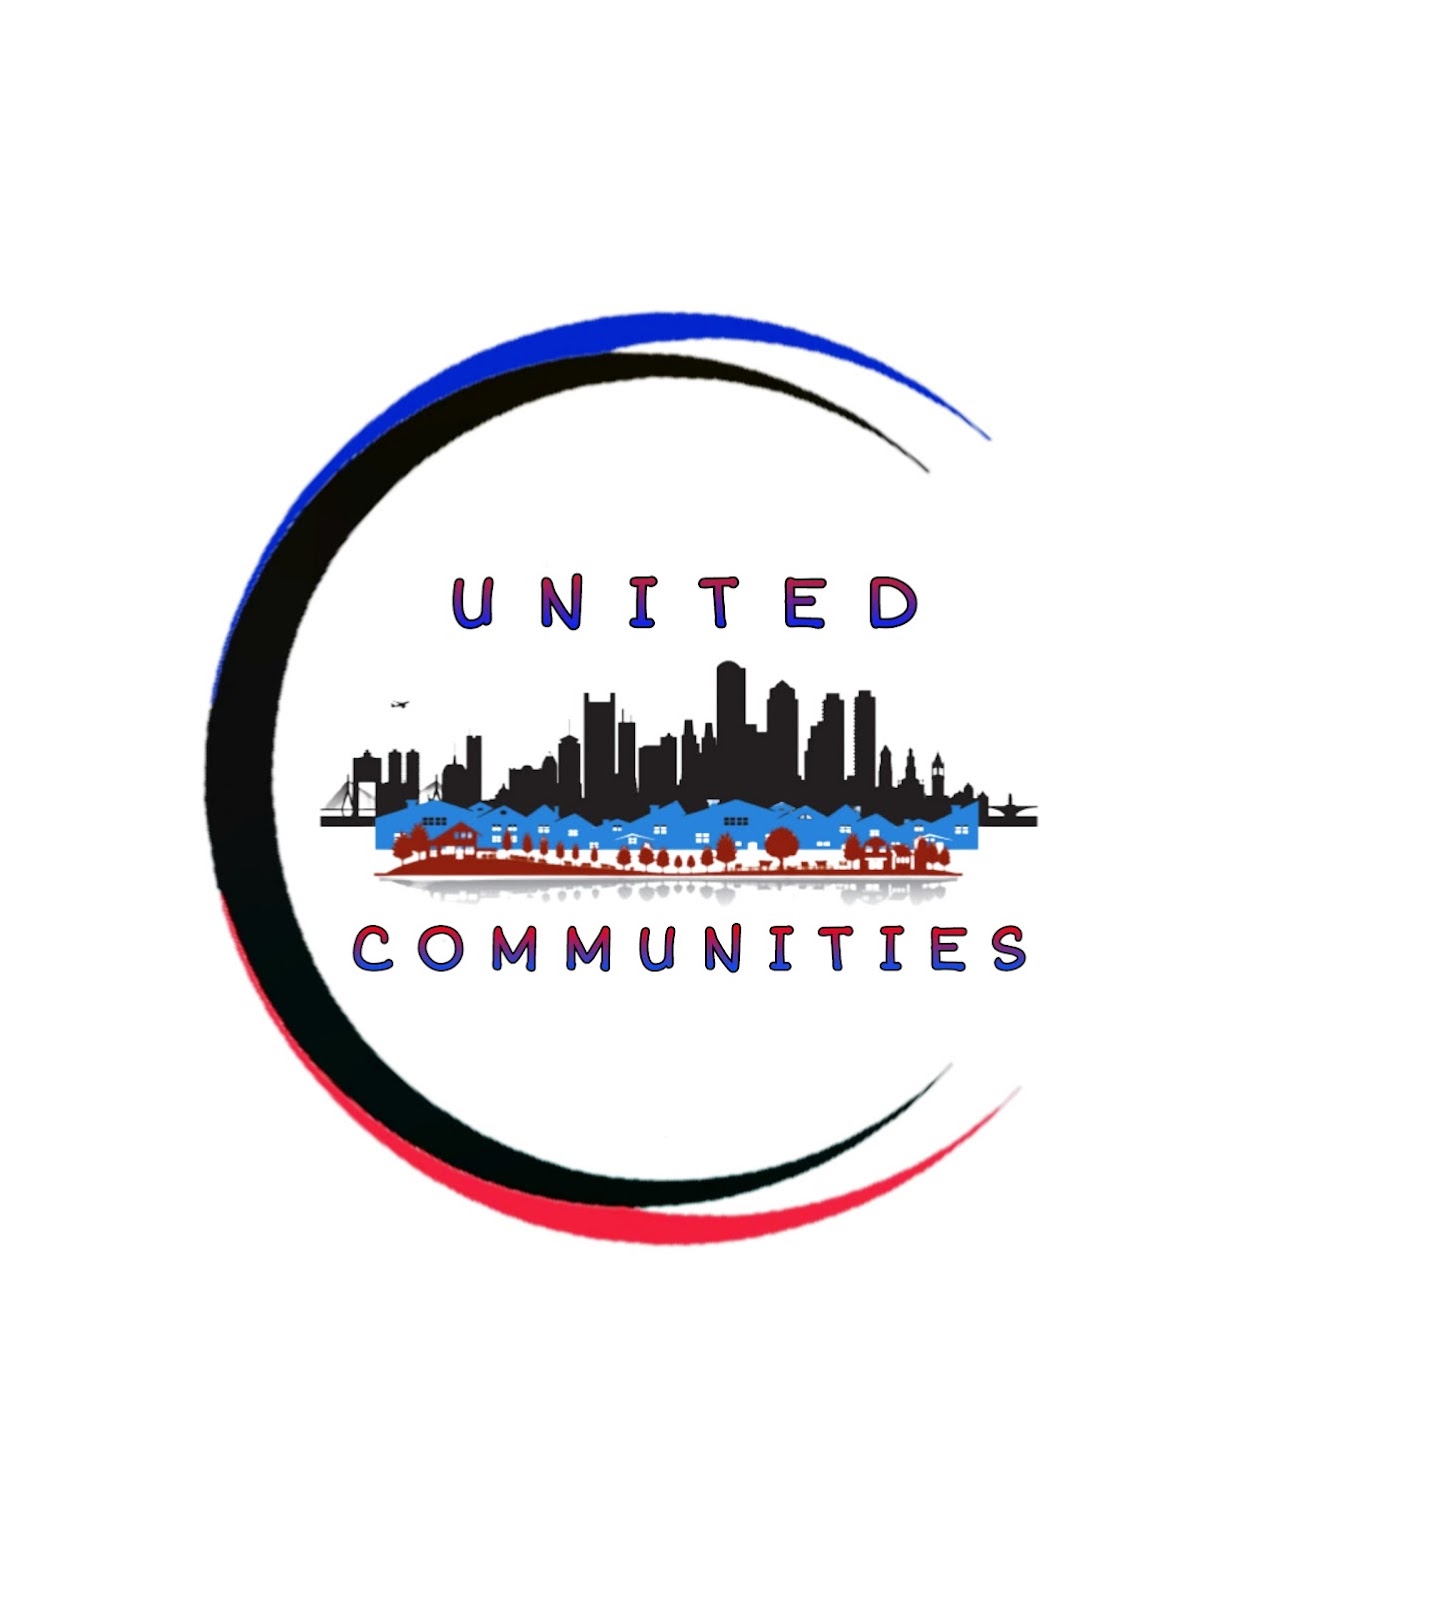 Our United Communities: The Why Behind the Name